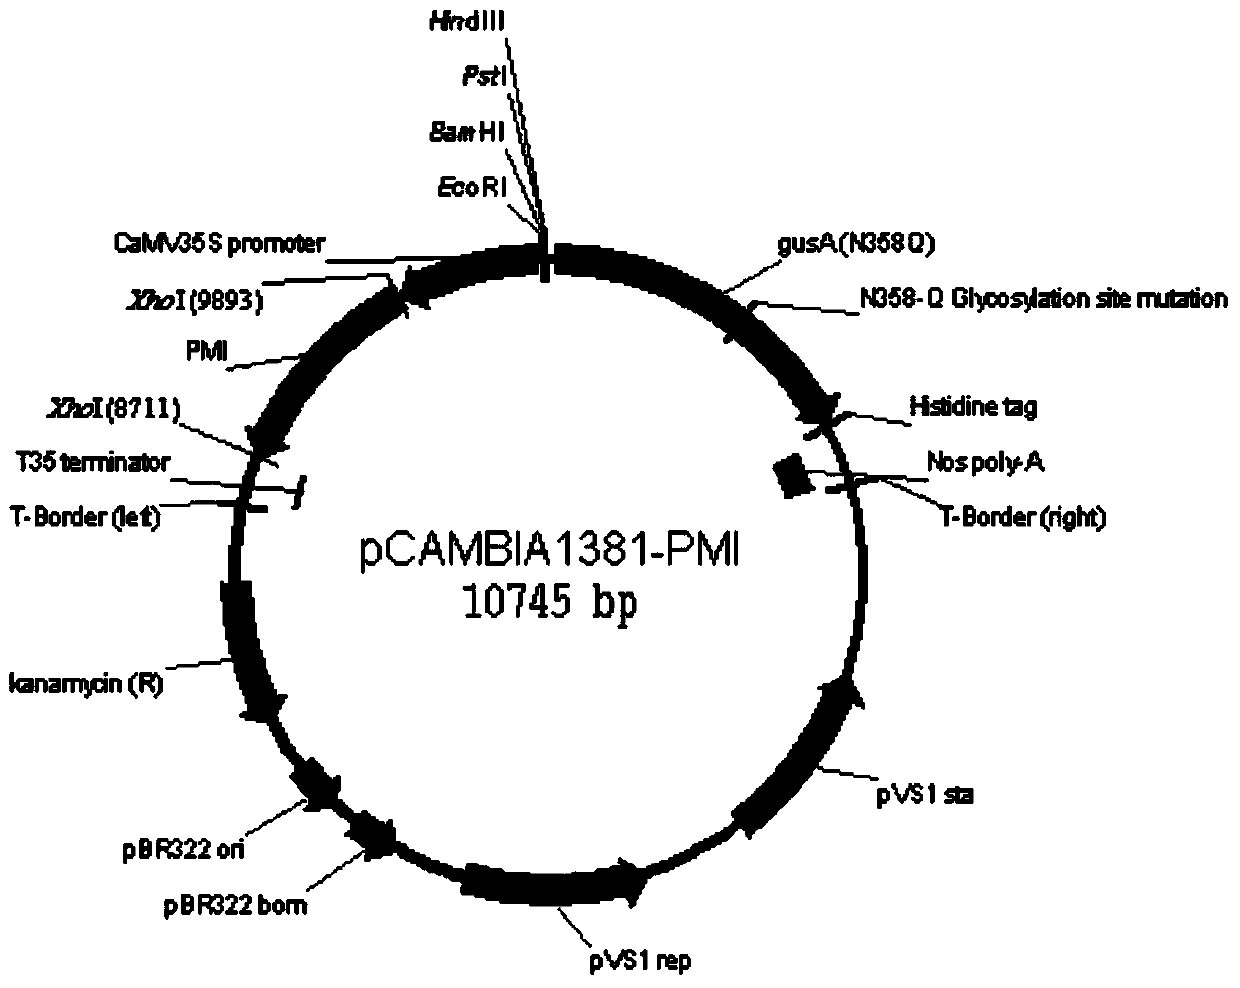 Method for introducing foreign gene into cleistogamy japonica rice by utilizing PMI (phosphomannose isomerase) selection marker